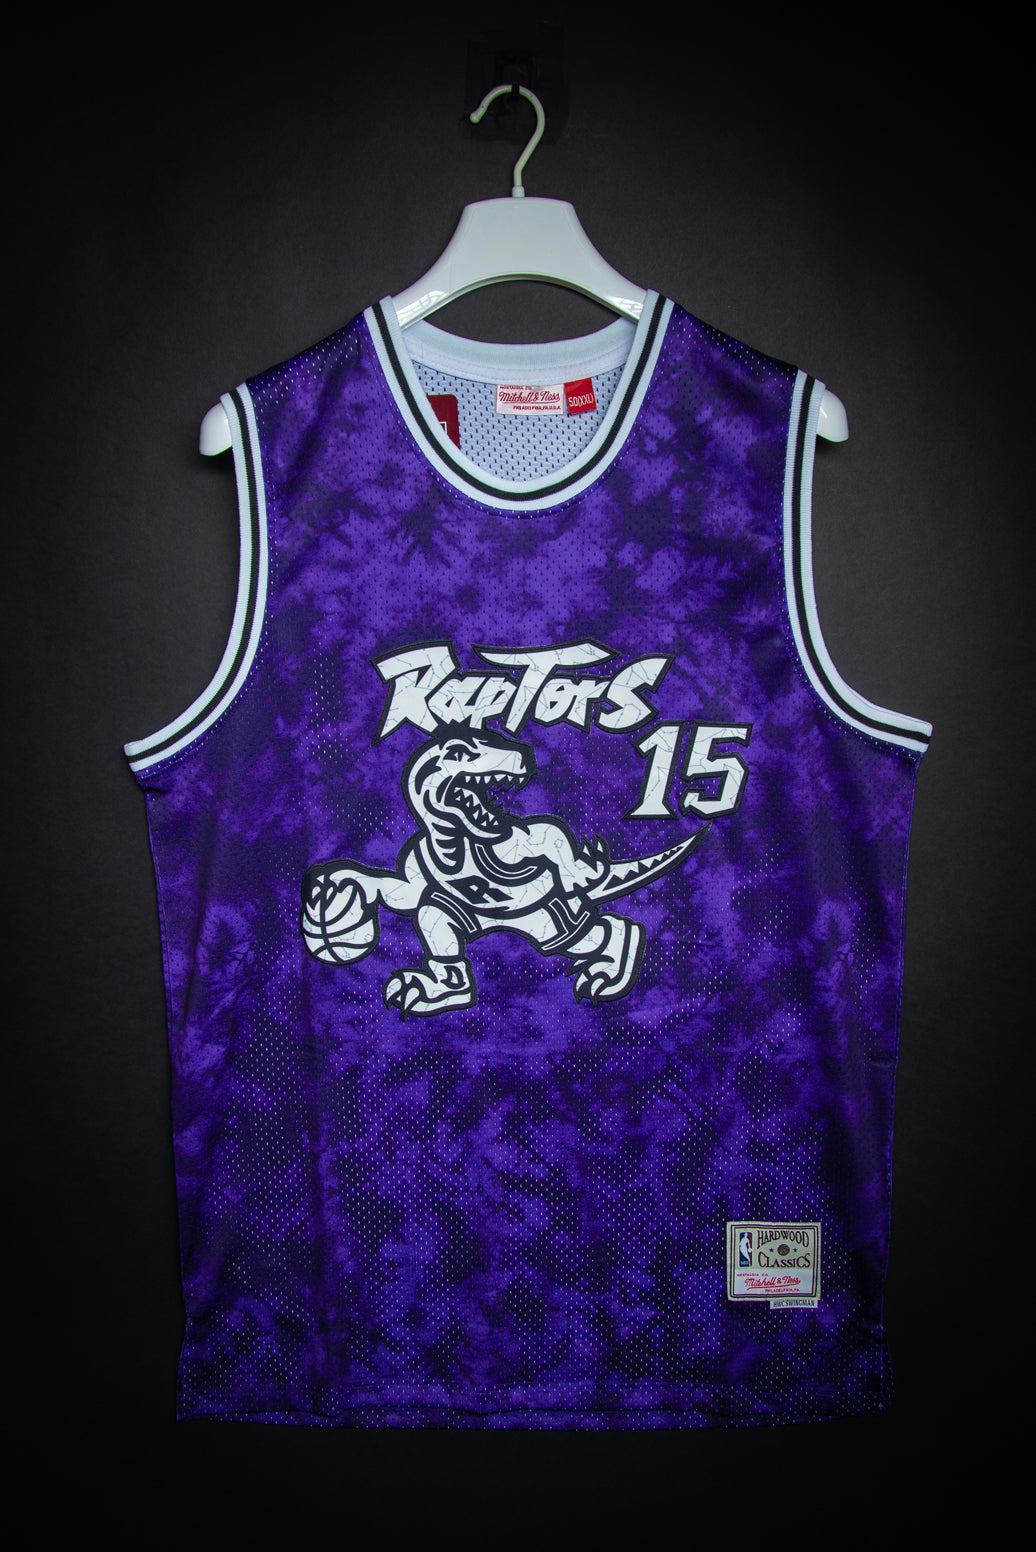 The stars come out for Vince Carter jersey trade